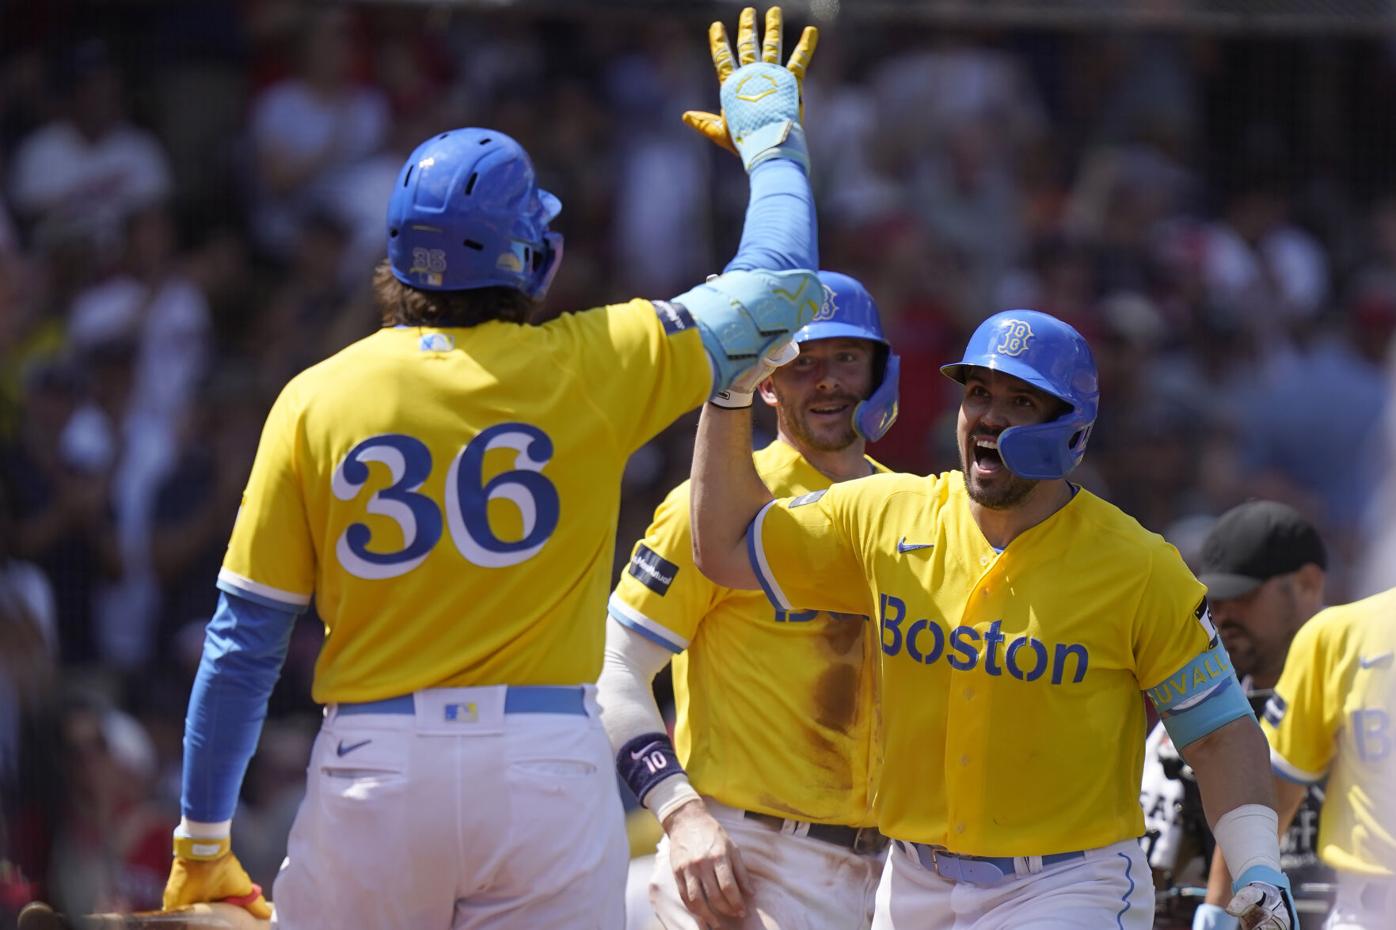 sox blue and yellow uniform